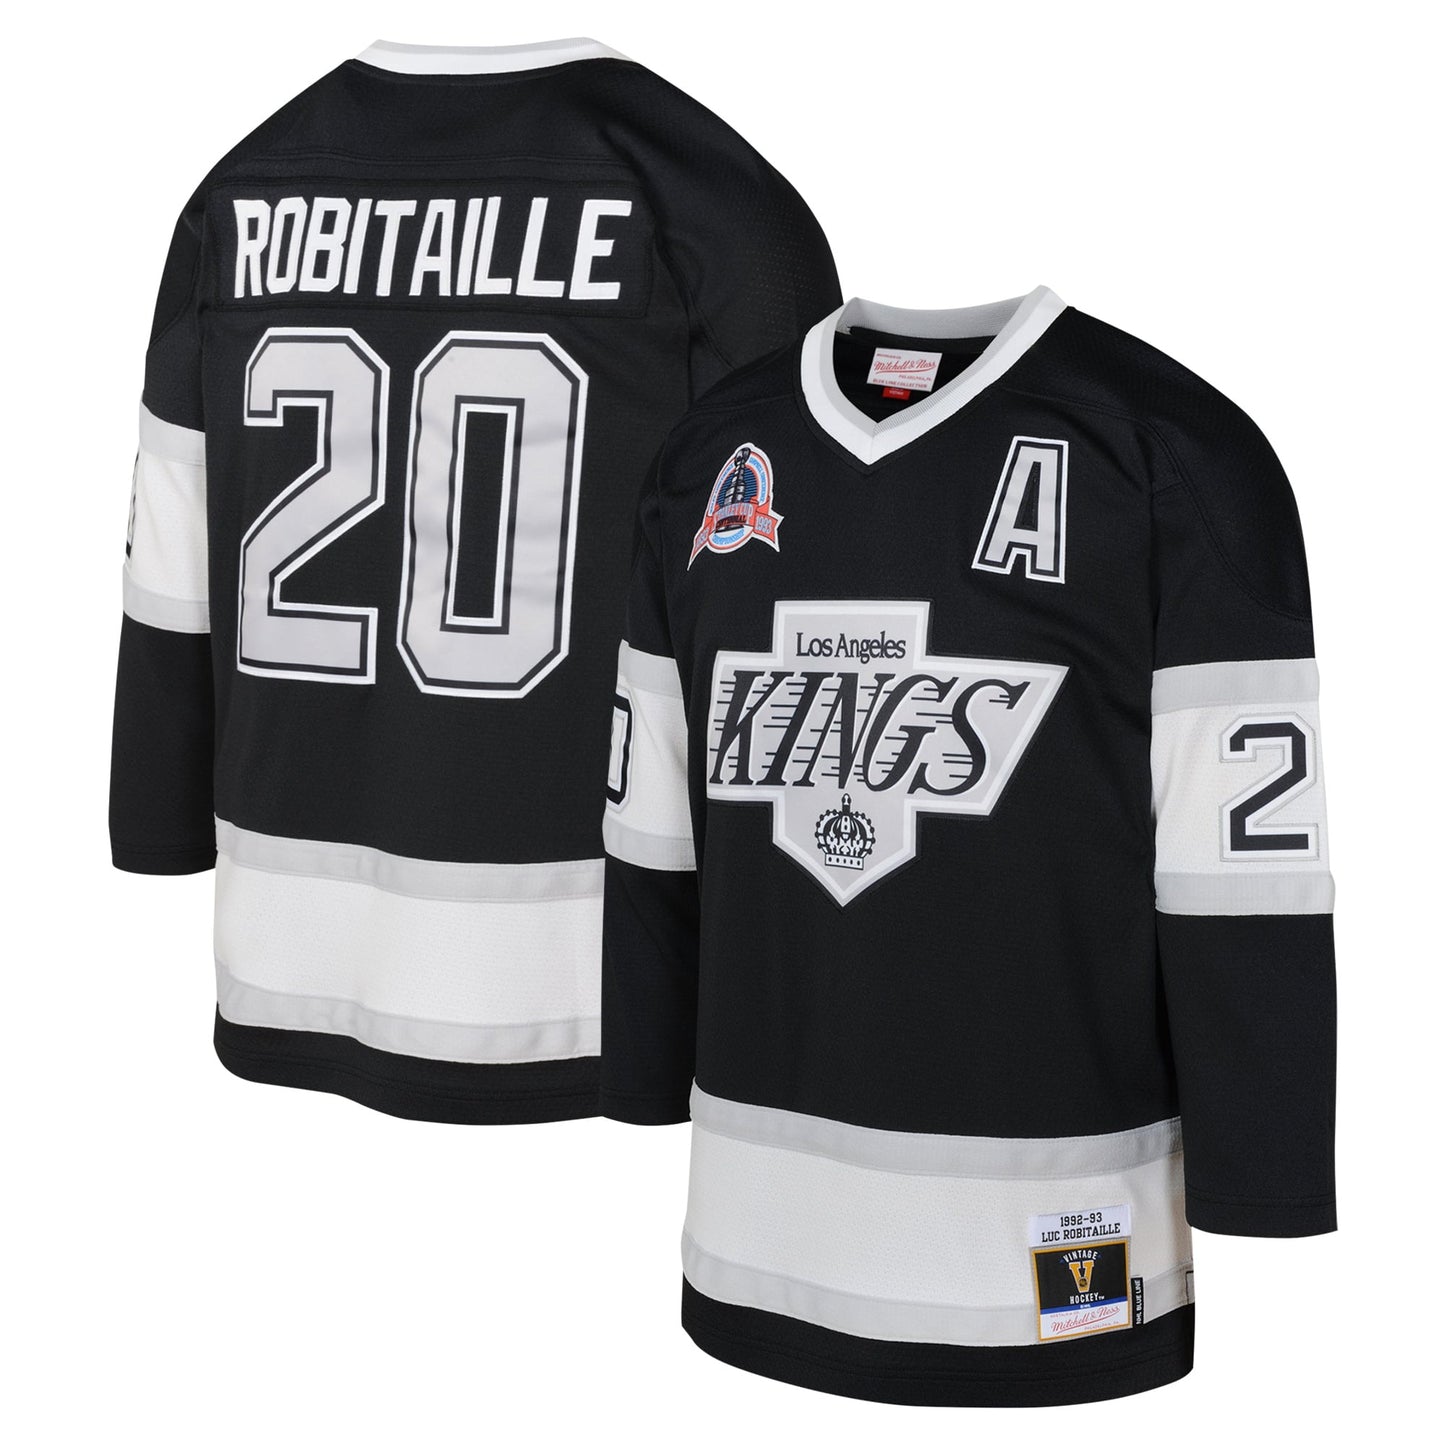 Youth Mitchell & Ness Luc Robitaille Black Los Angeles Kings 1992 Blue Line Player Jersey